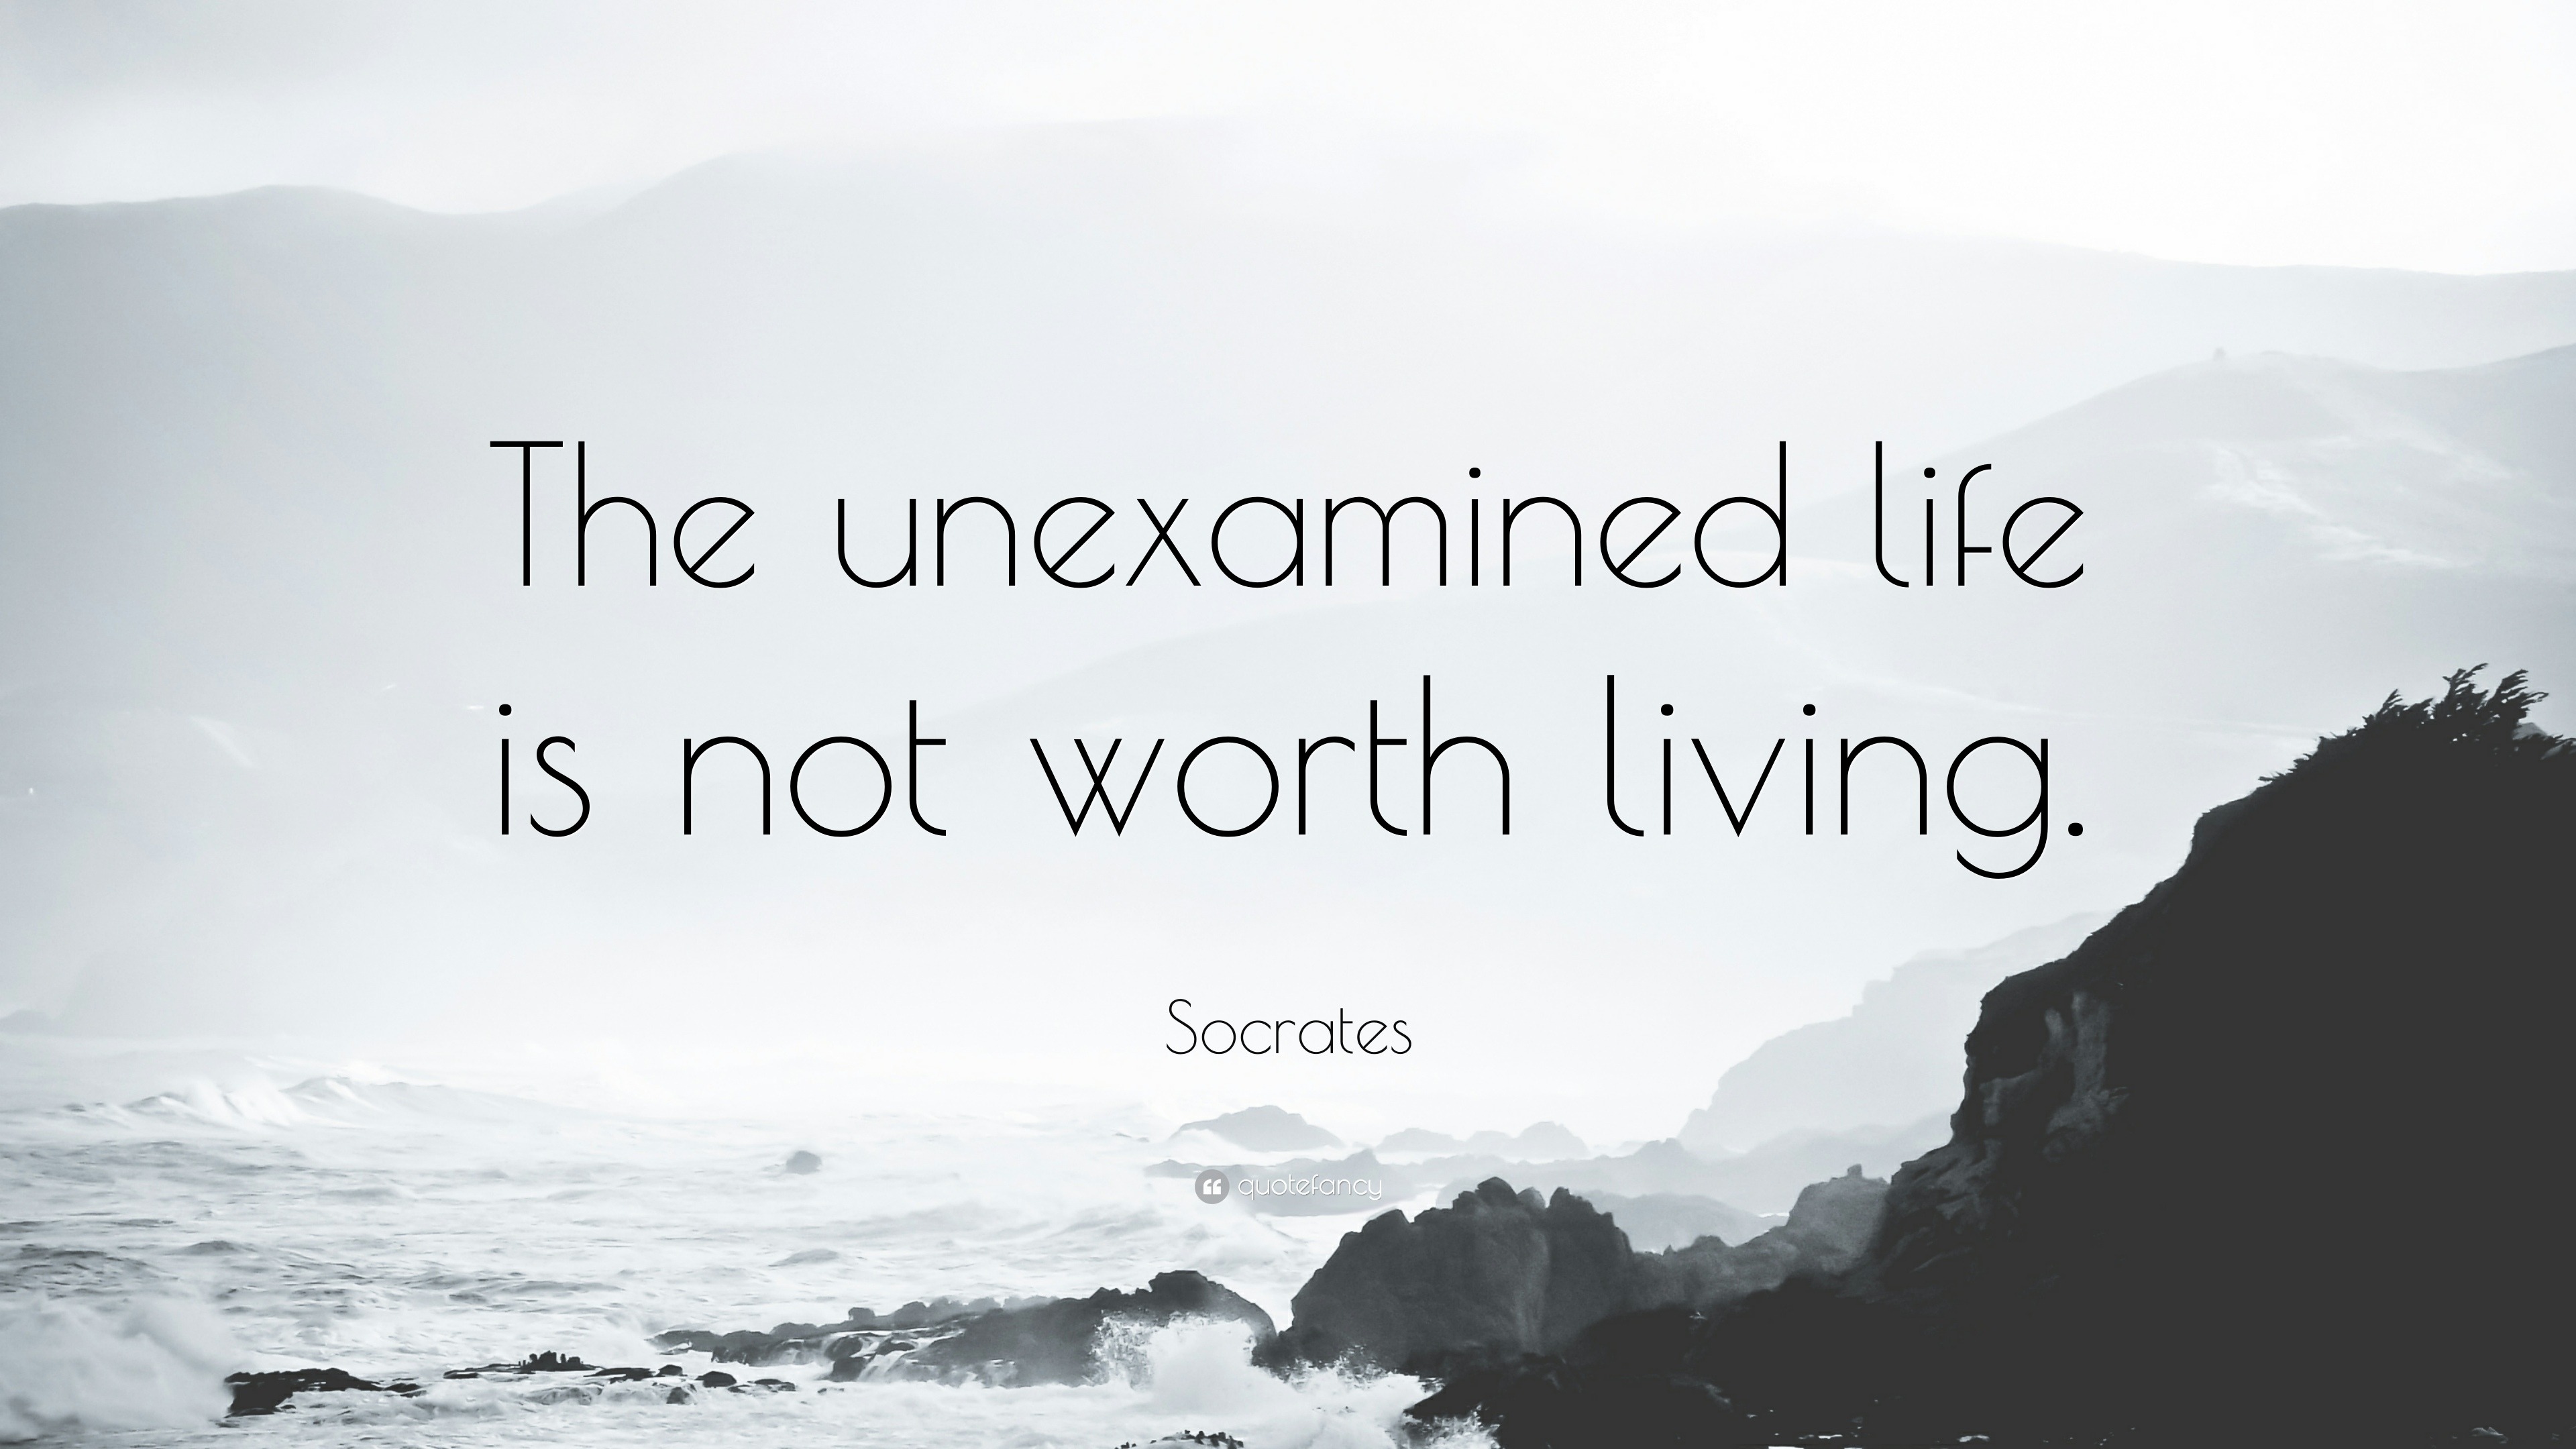 Socrates Quote “The unexamined life is not worth living ”